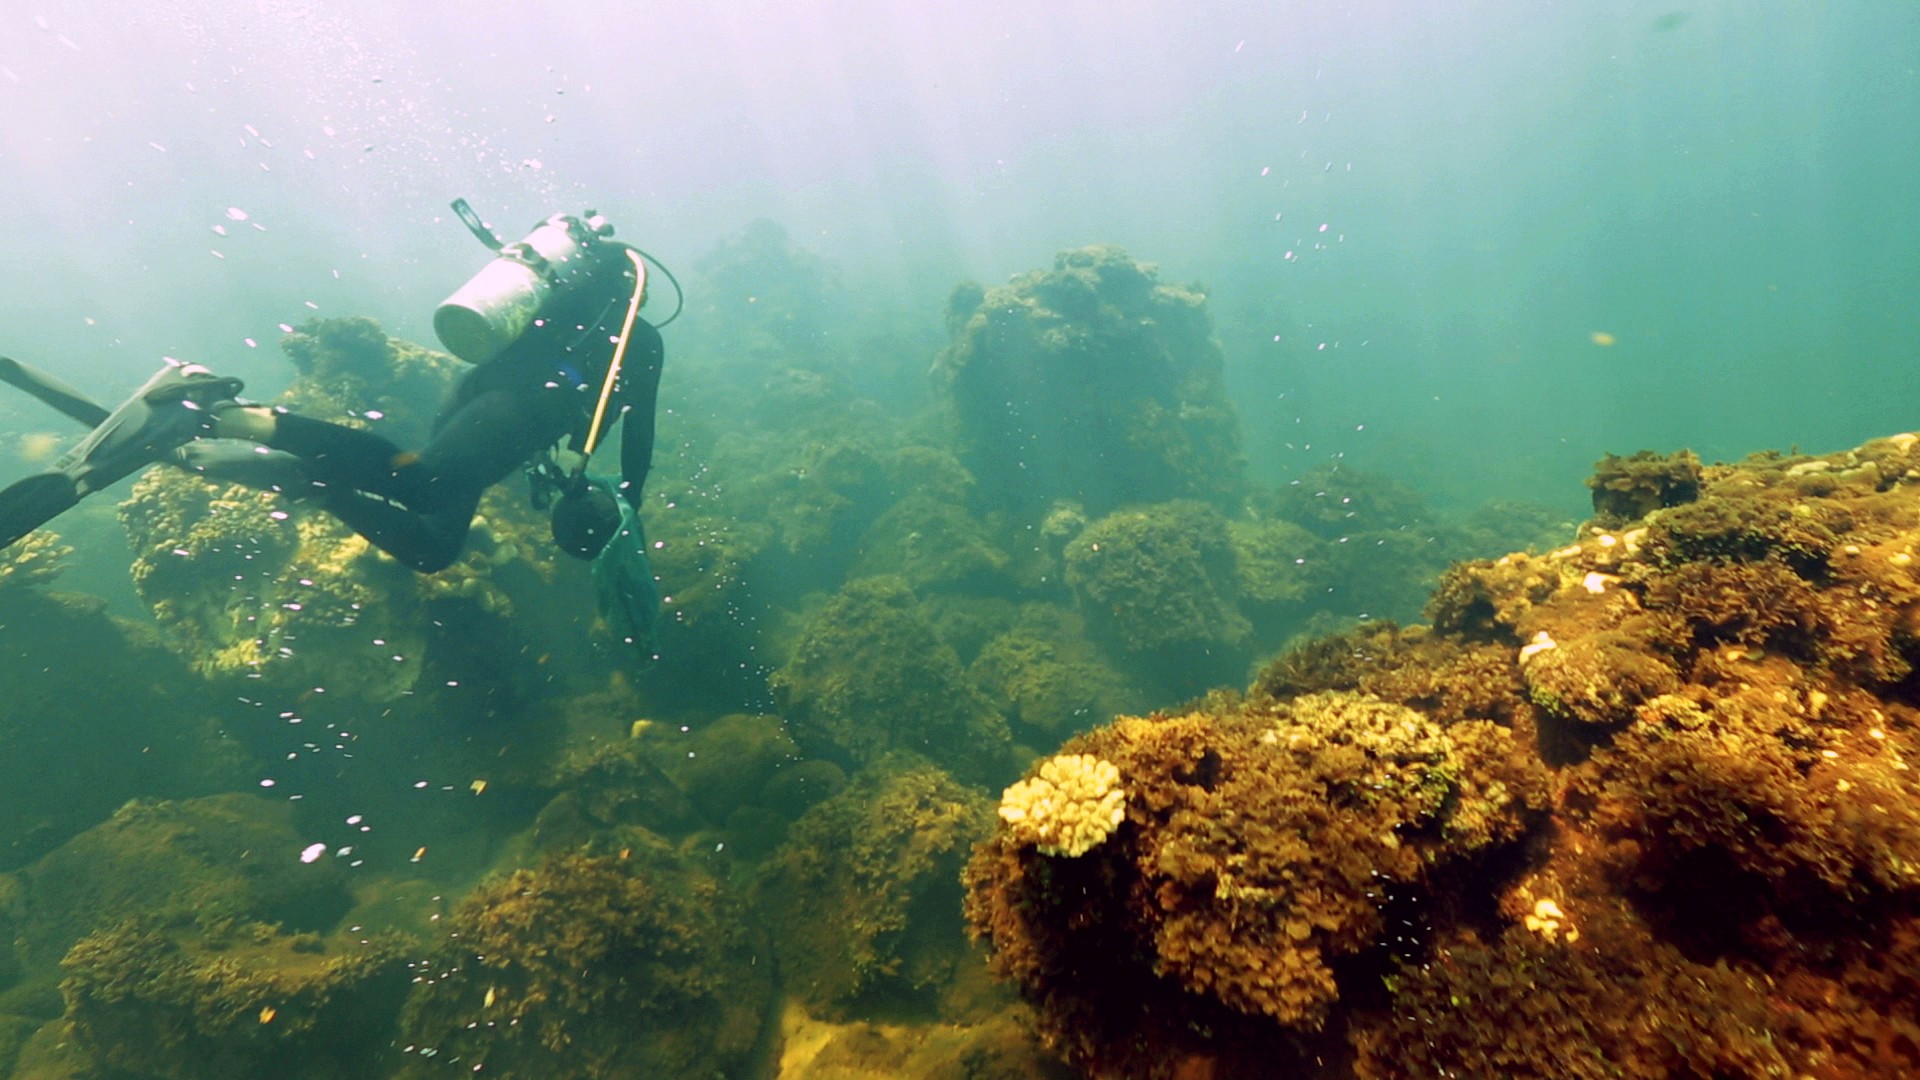 Coral ecologist Ian Enochs dives in the carbon dioxide bubbles of Maug's coral reefs (credit: Stephani Gordon/Open Boat Films/NOAA)